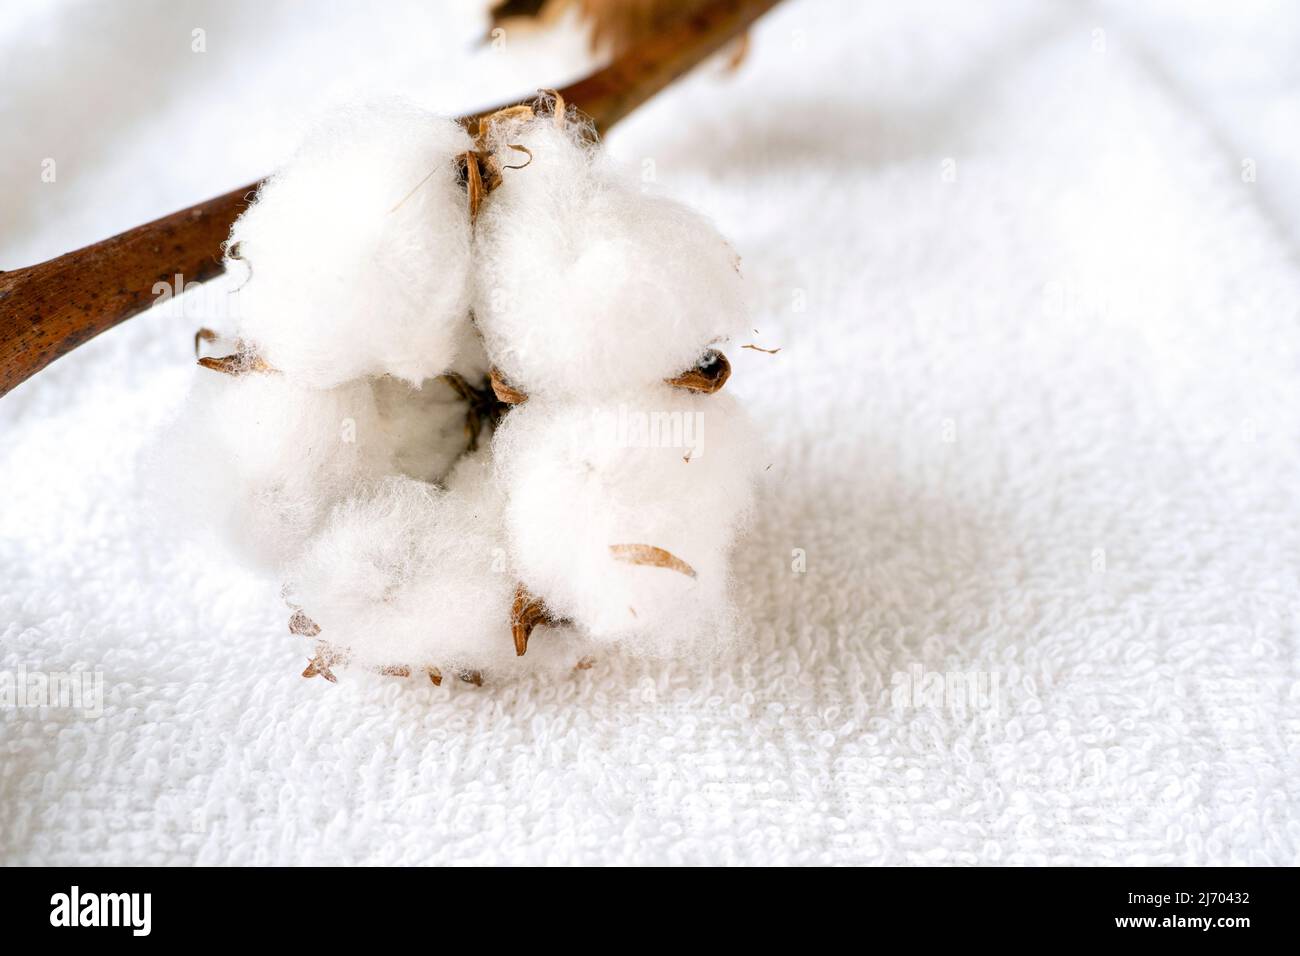 Close-up of natural cotton plant on white, soft towel Stock Photo